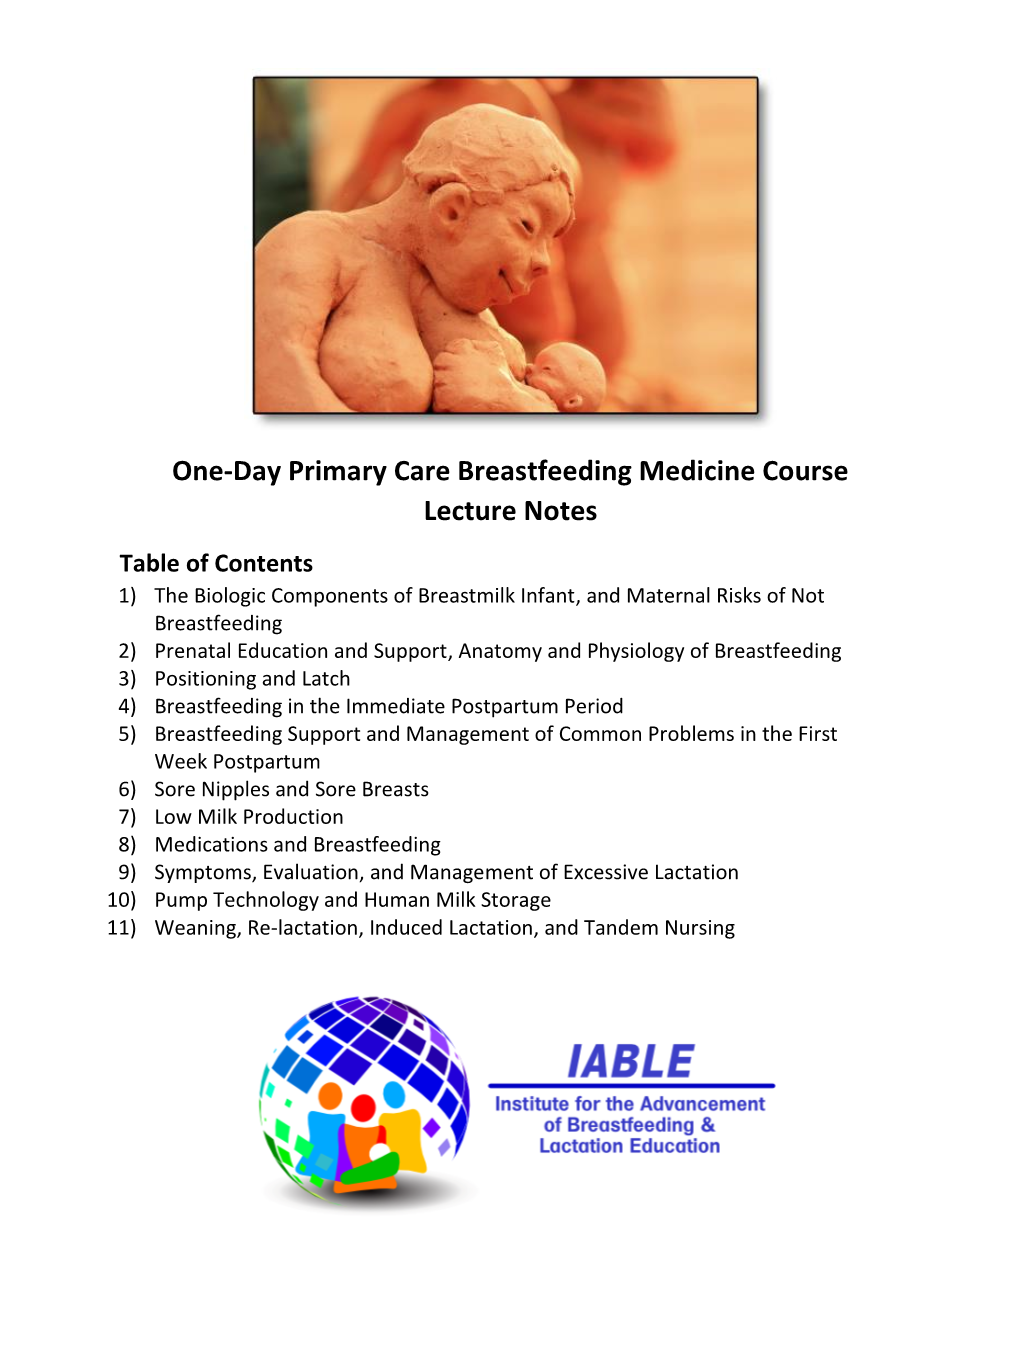 One-Day Primary Care Breastfeeding Medicine Course Lecture Notes